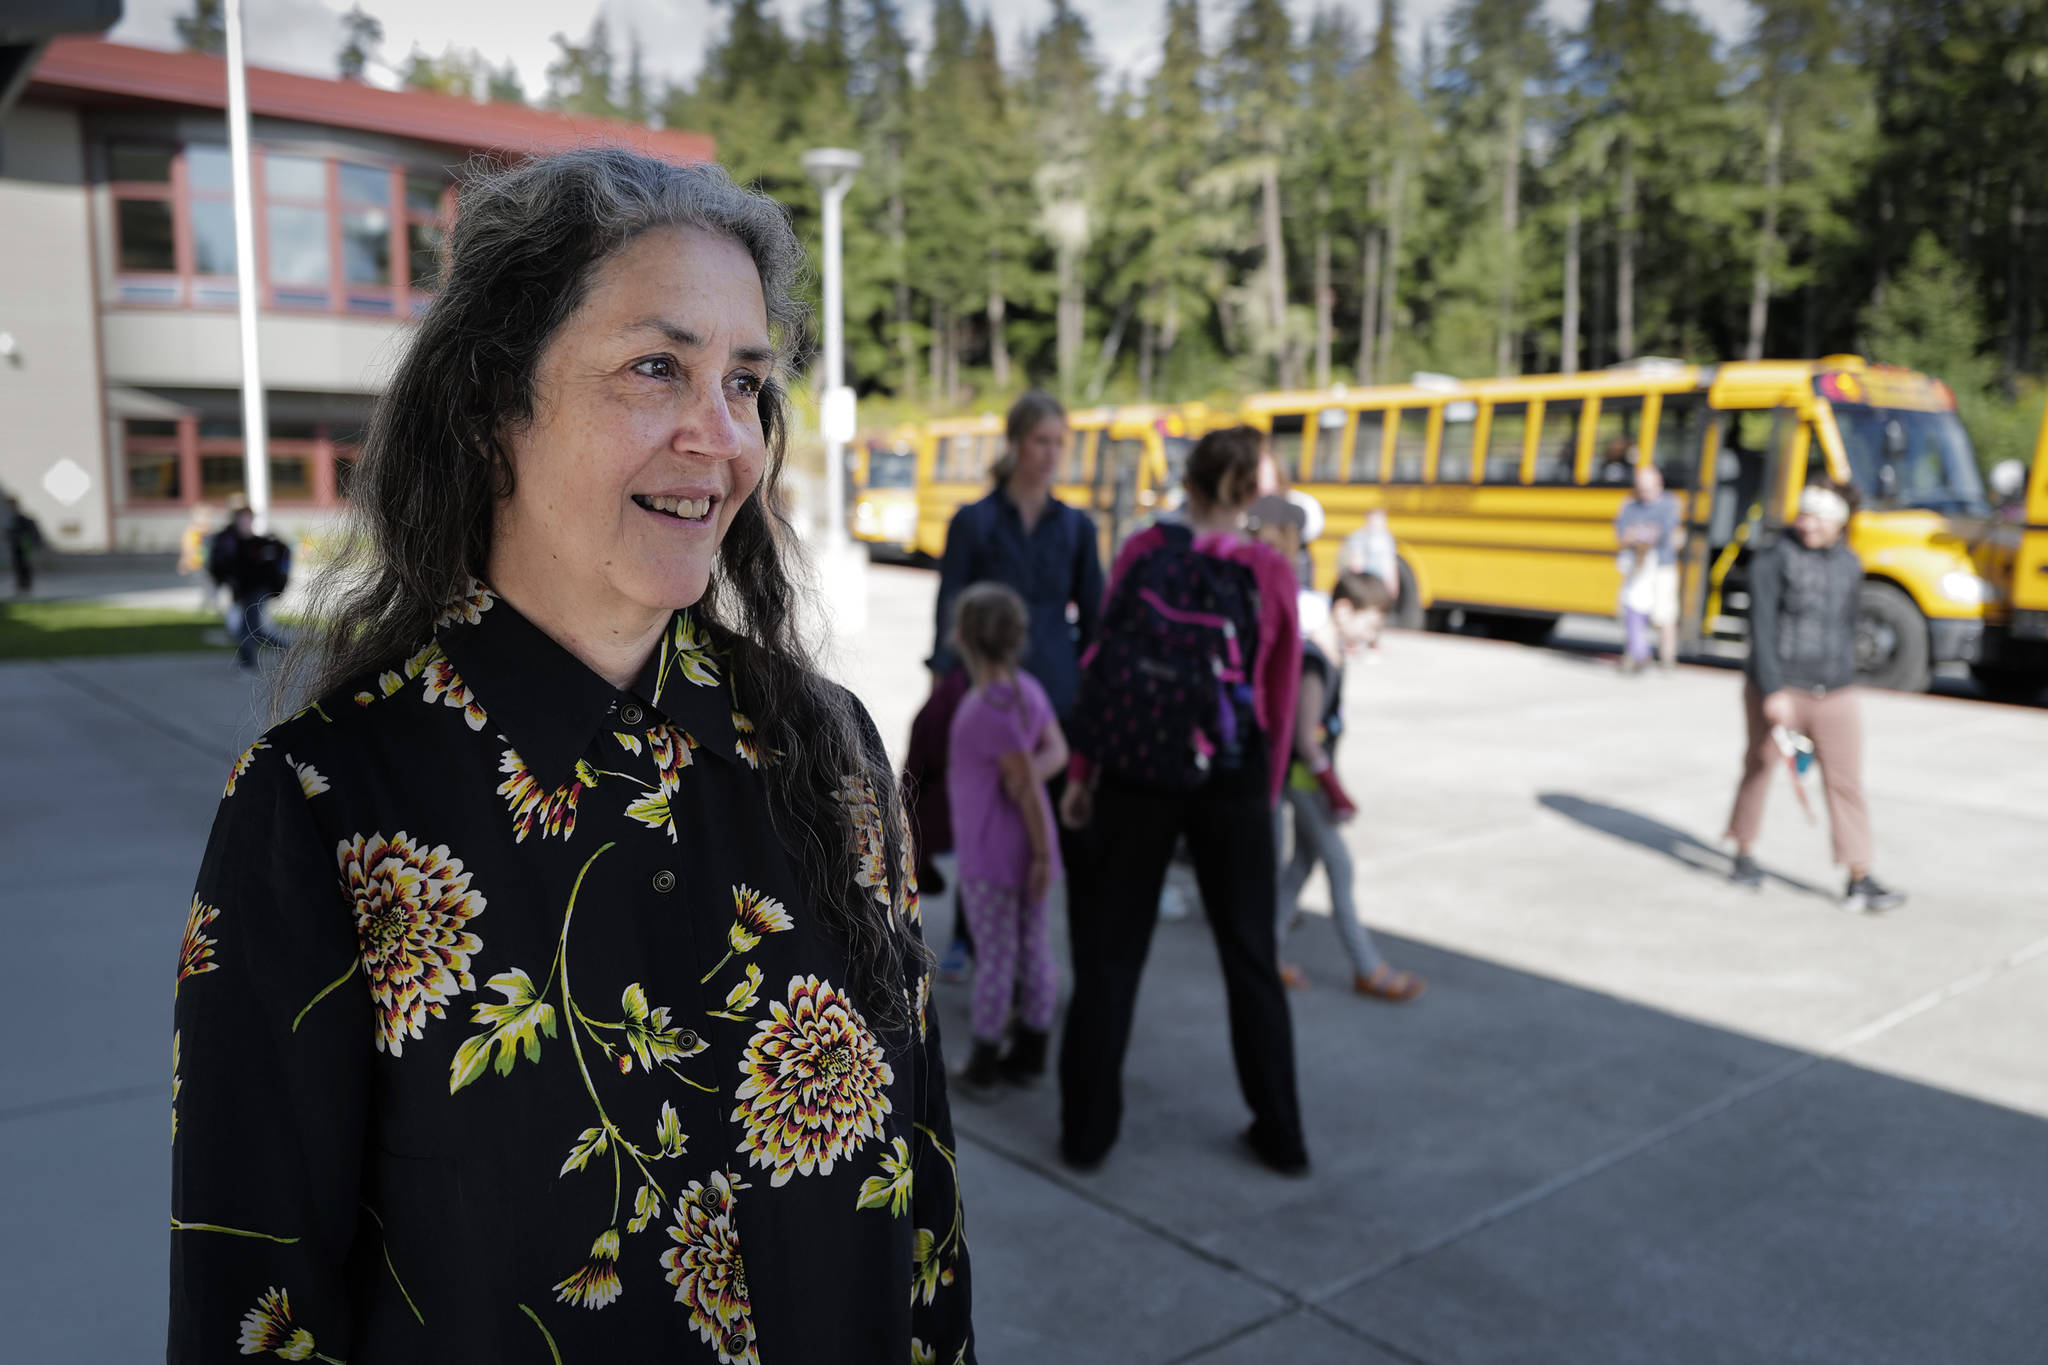 Pam Garcia, a long-time educator at Auke Bay Elementary School, watches as students catch their buses after school on Tuesday, Sept. 3, 2019. Garcia was named as one of three finalist for Alaska Teacher of the Year. (Michael Penn | Juneau Empire)